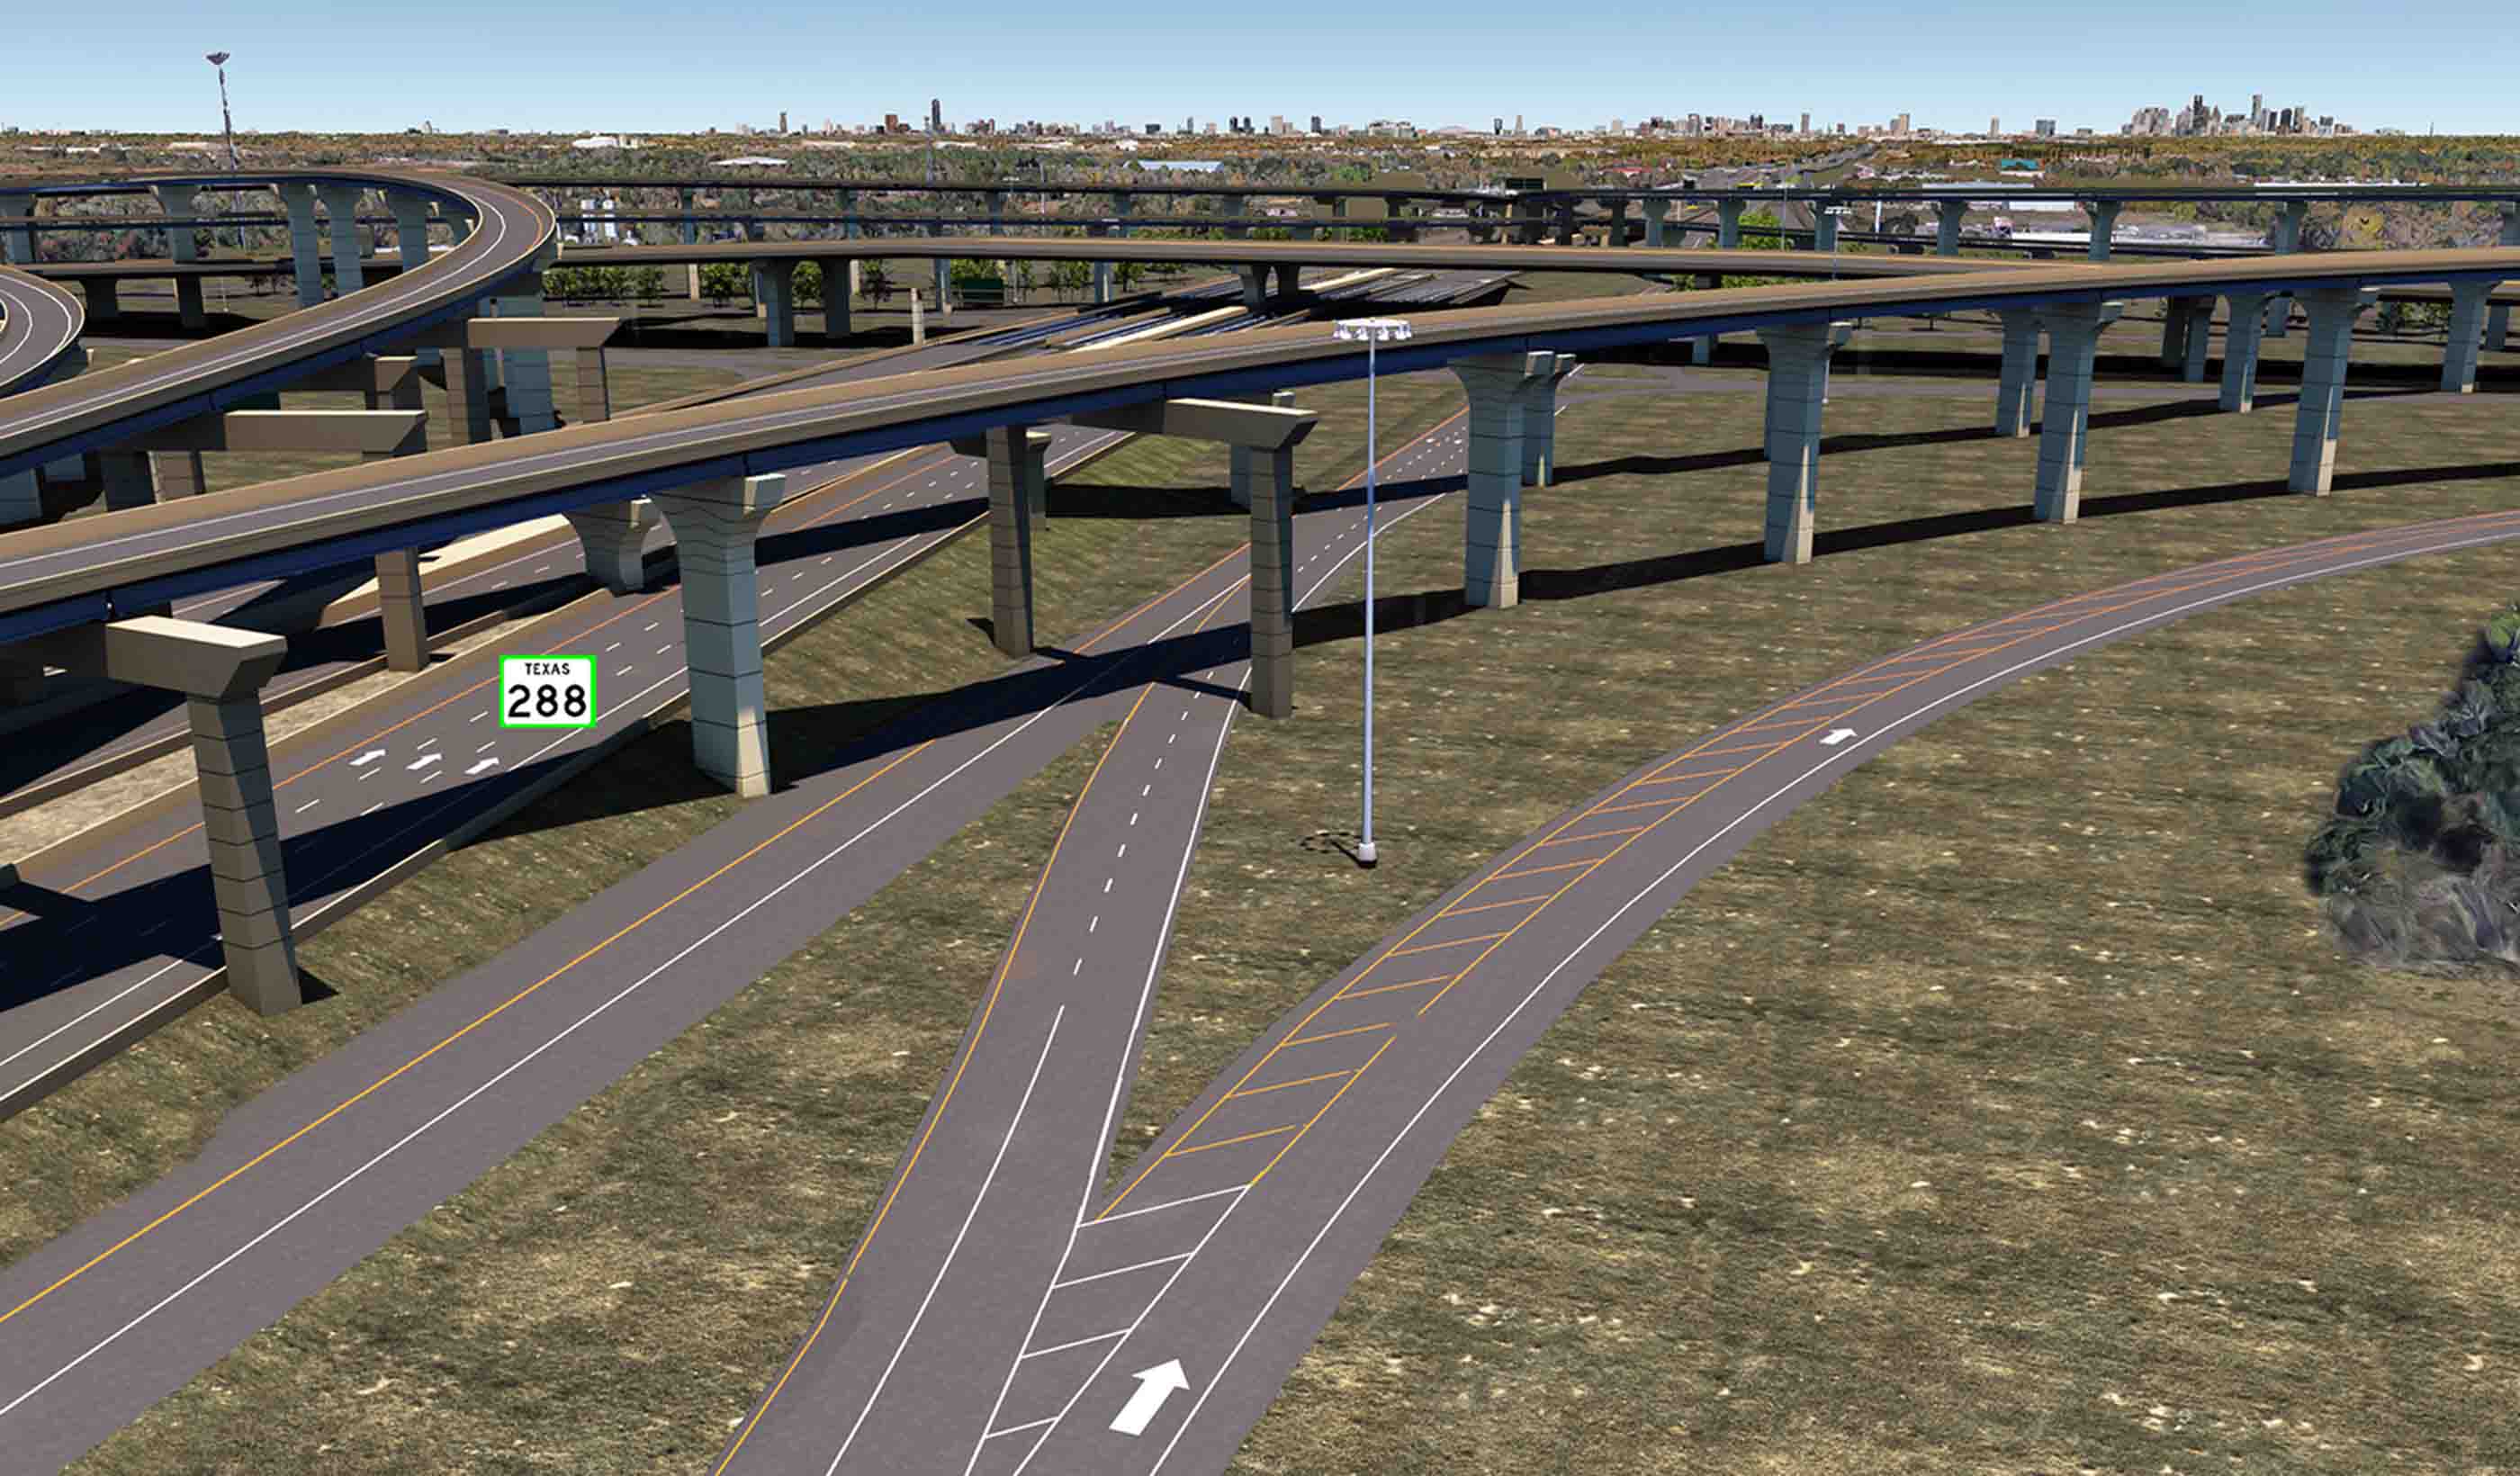 4 reasons why 3D modeling and BIM are the future of infrastructure design